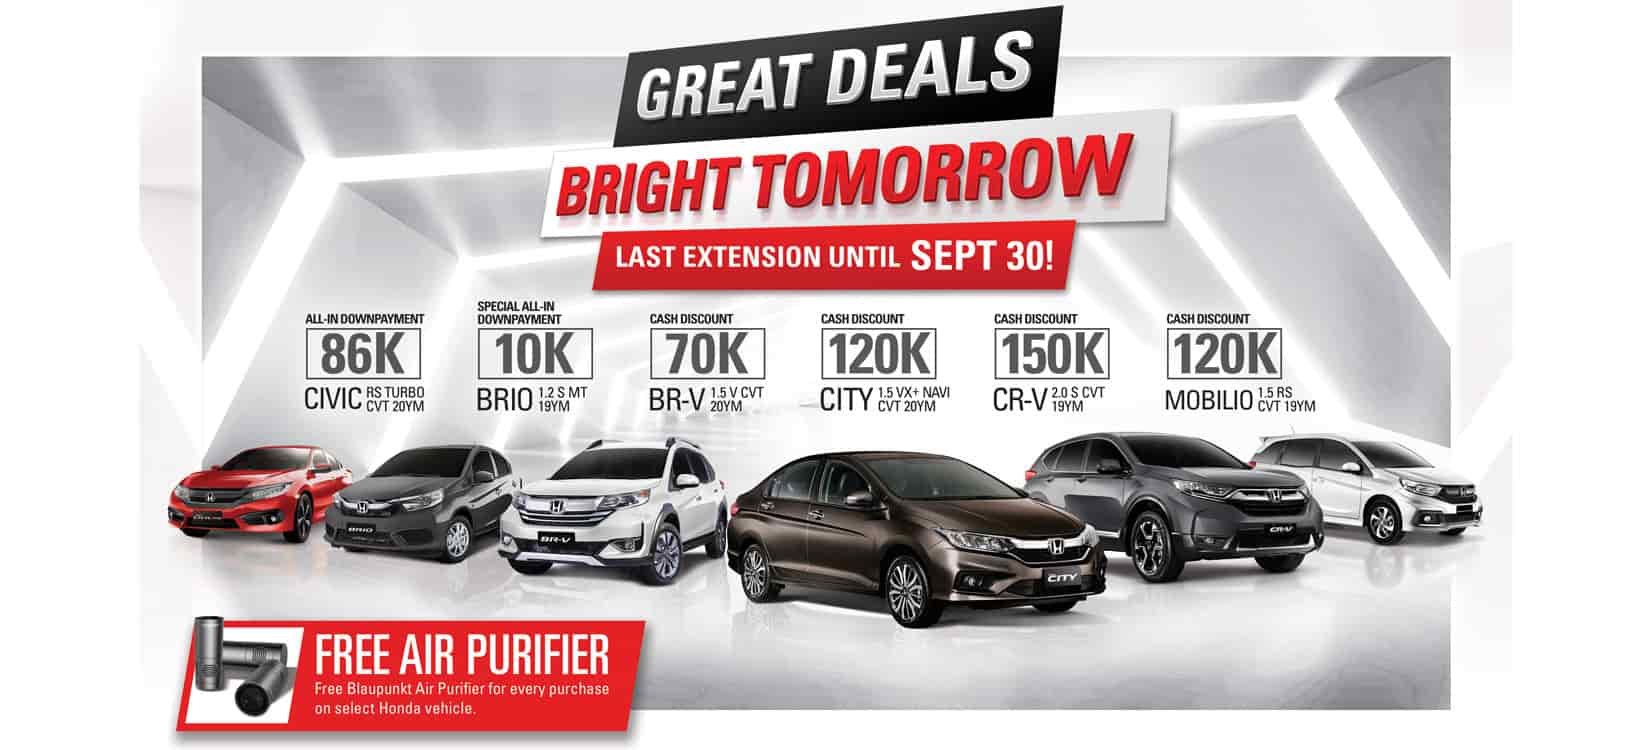 Honda announces final extension of huge cash discounts, other great deals this September